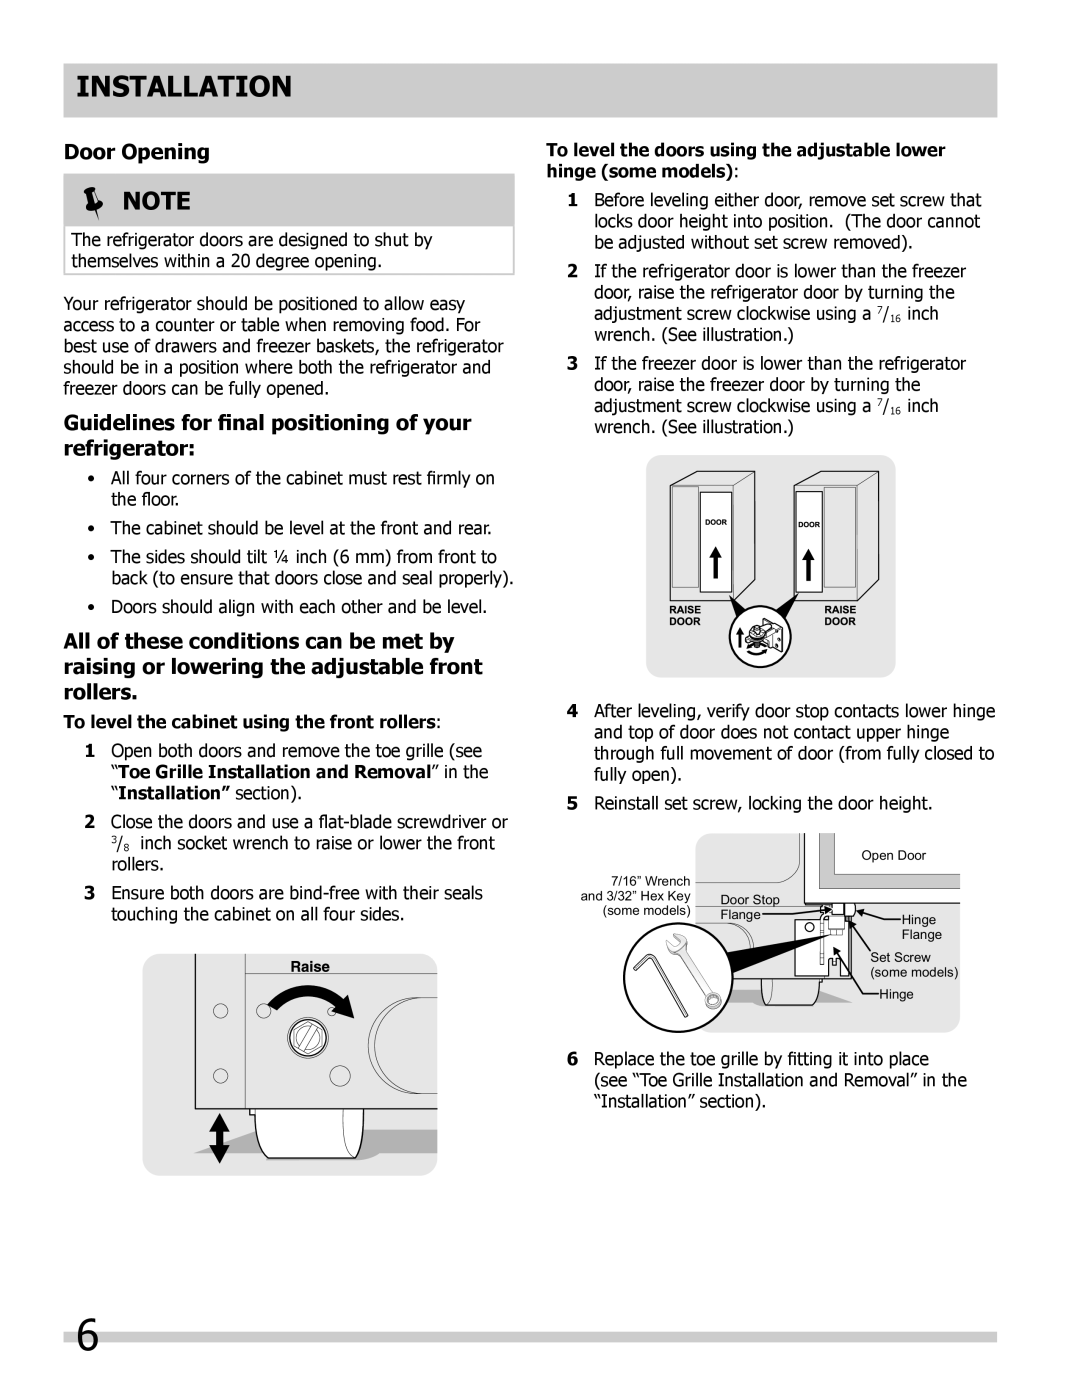 Frigidaire 242108500 manual Door Opening, Guidelines for final positioning of your refrigerator, Installation,  Note 